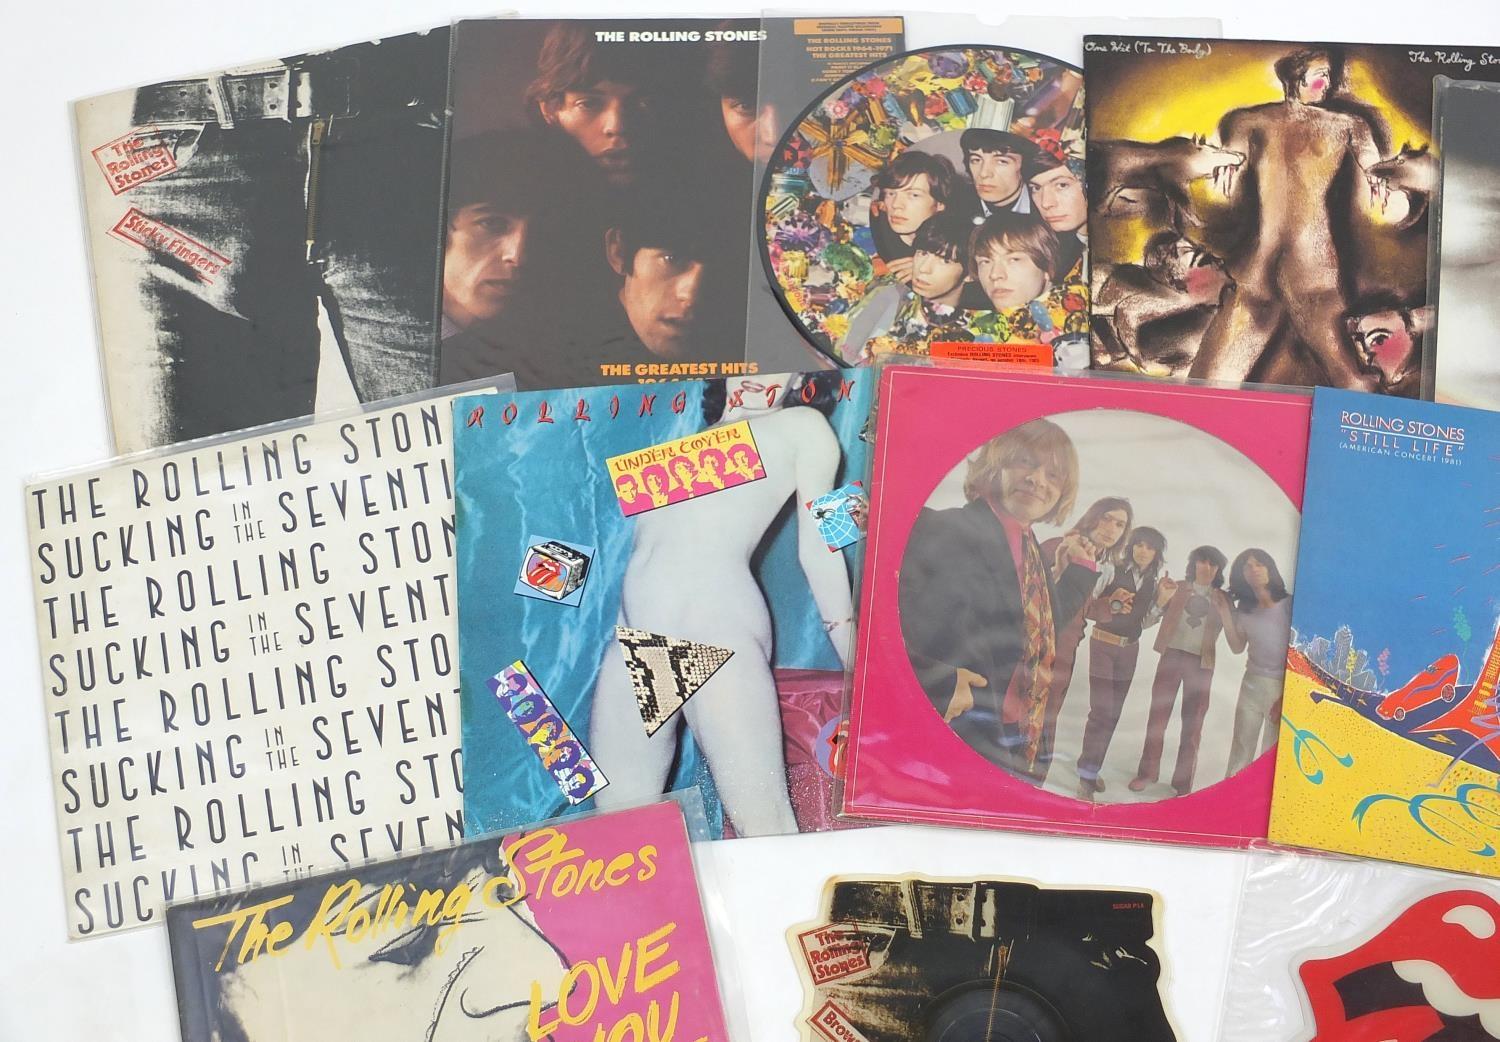 Rolling Stones vinyl LP's, some picture discs including Sticky Fingers with insert COC59100, Love - Image 2 of 9